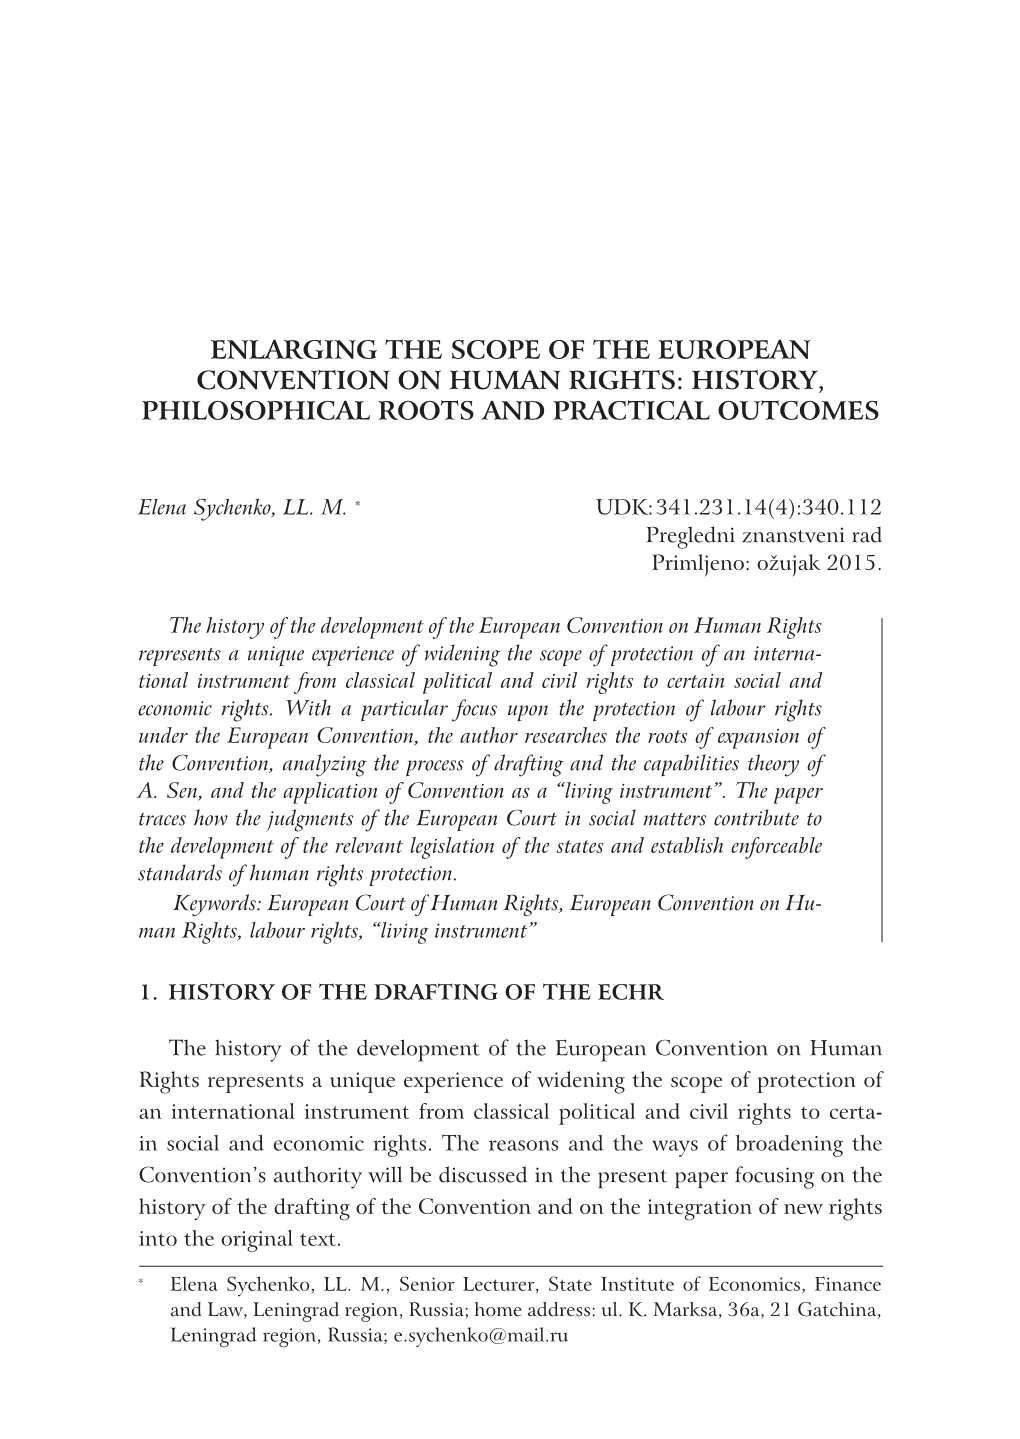 Enlarging the Scope of the European Convention on Human Rights: History, Philosophical Roots and Practical Outcomes